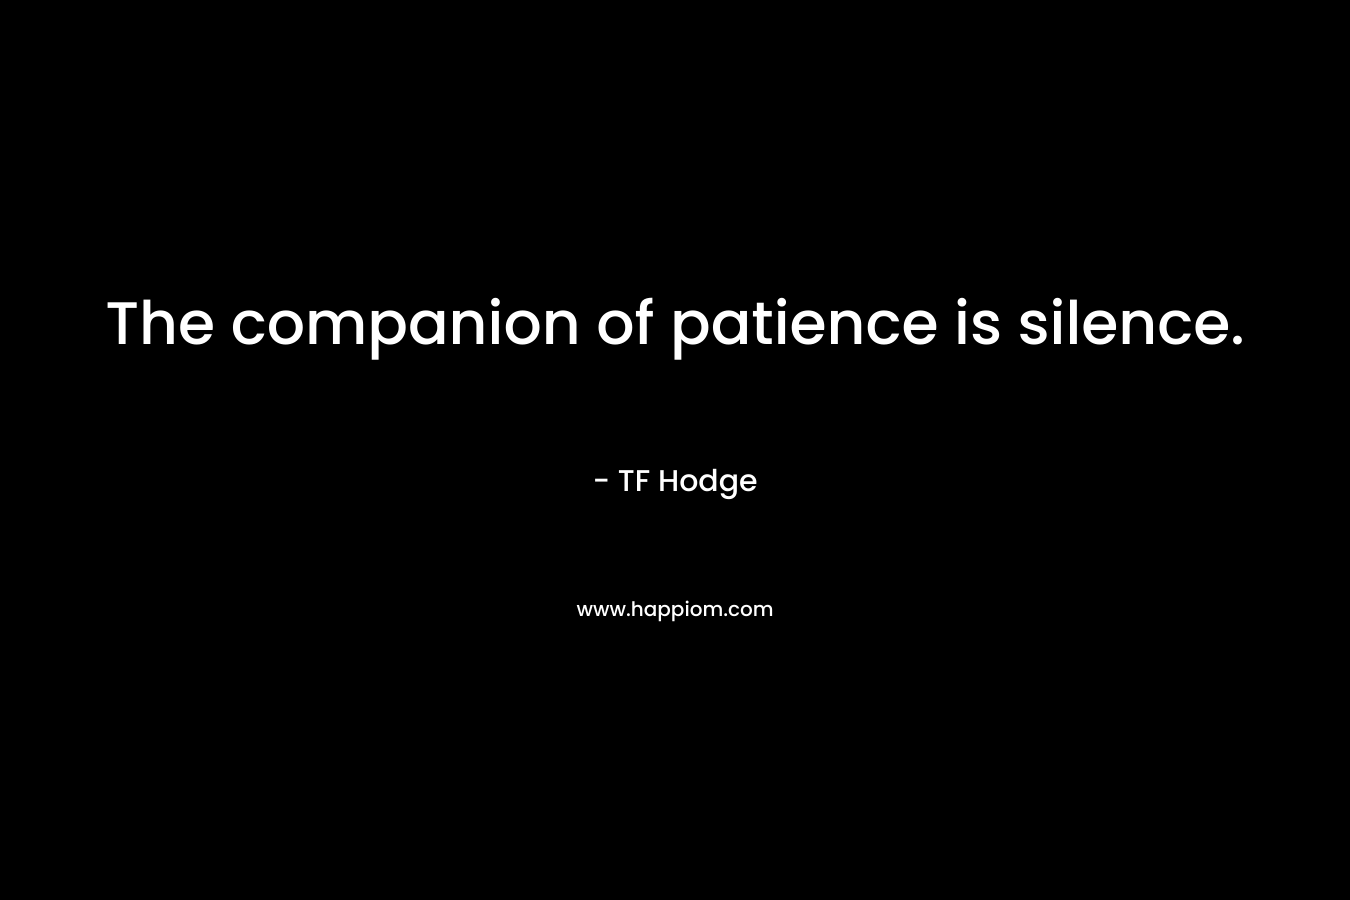 The companion of patience is silence. – TF Hodge